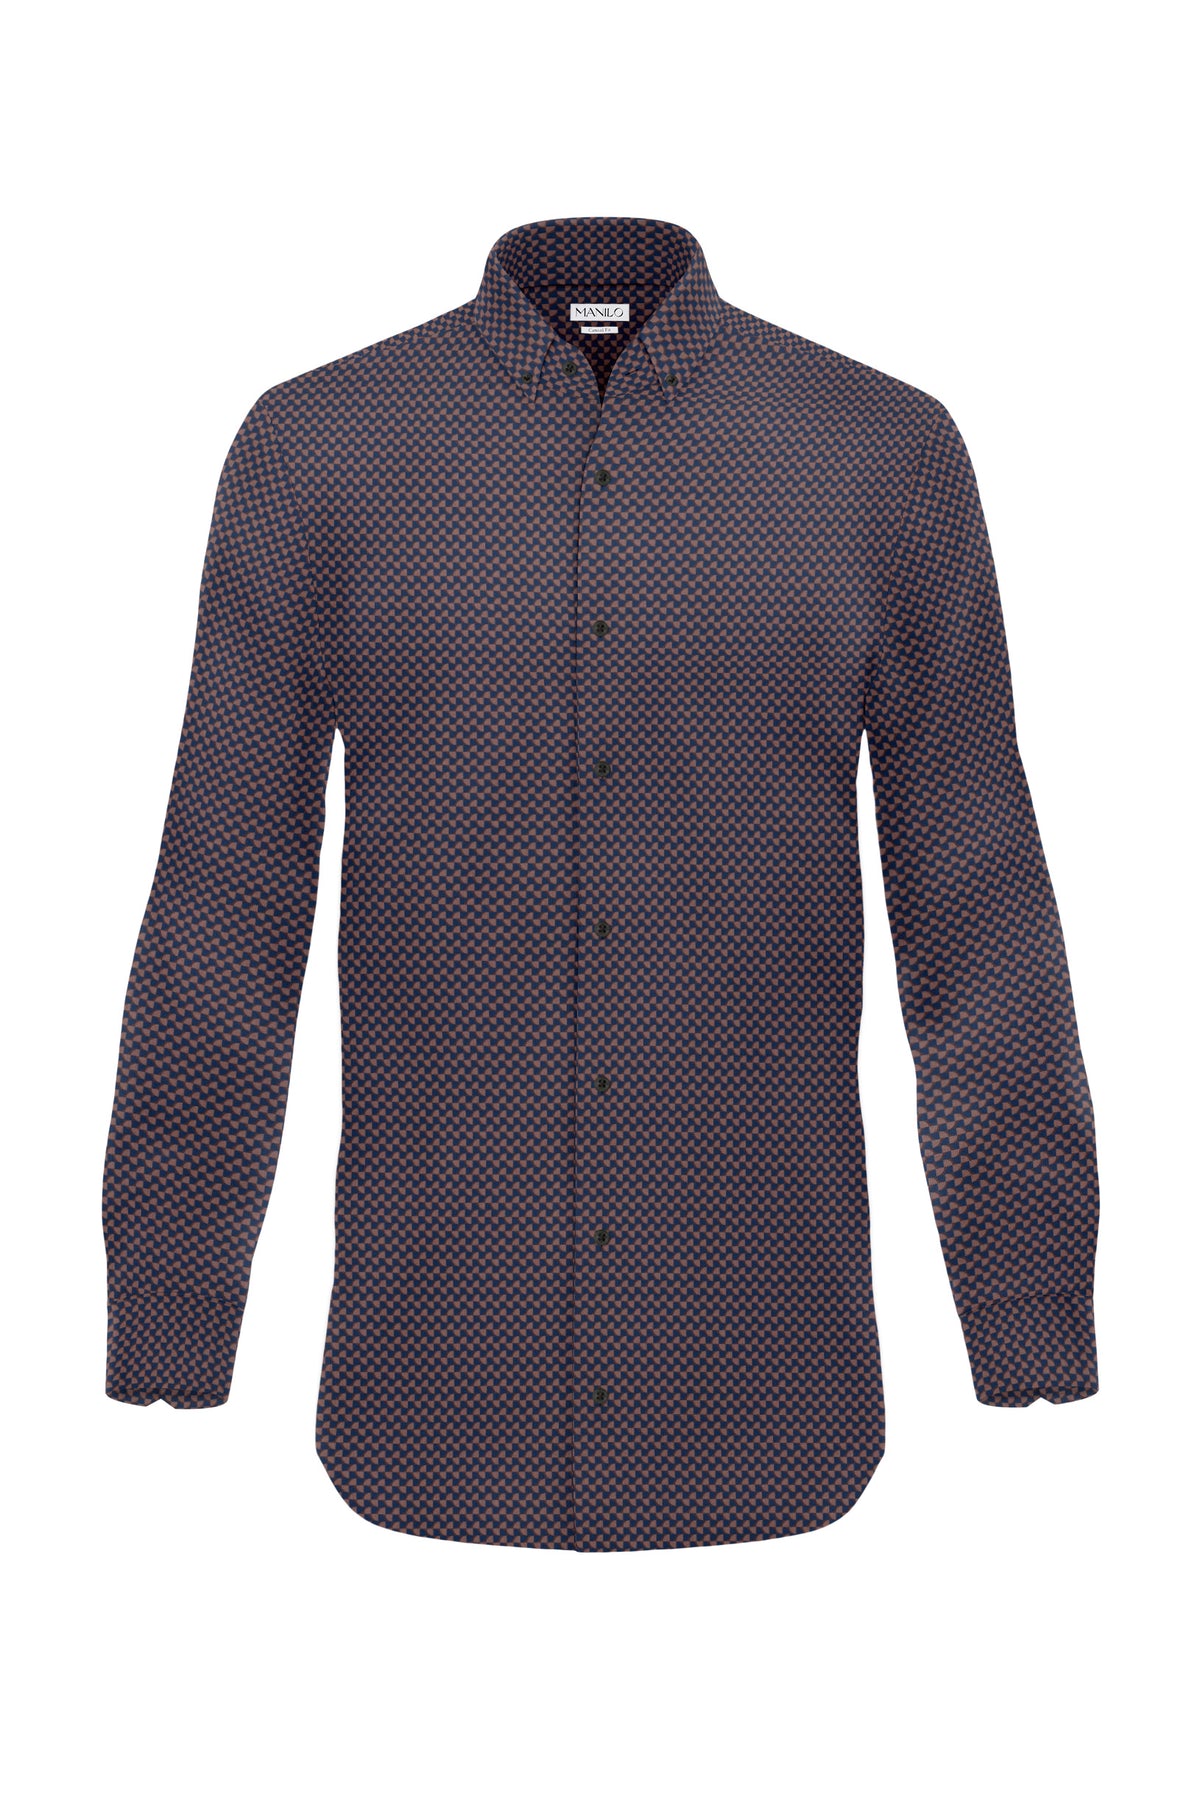 Printed casual shirt with graphic pattern in cognac/navy (Art. 2113-C)